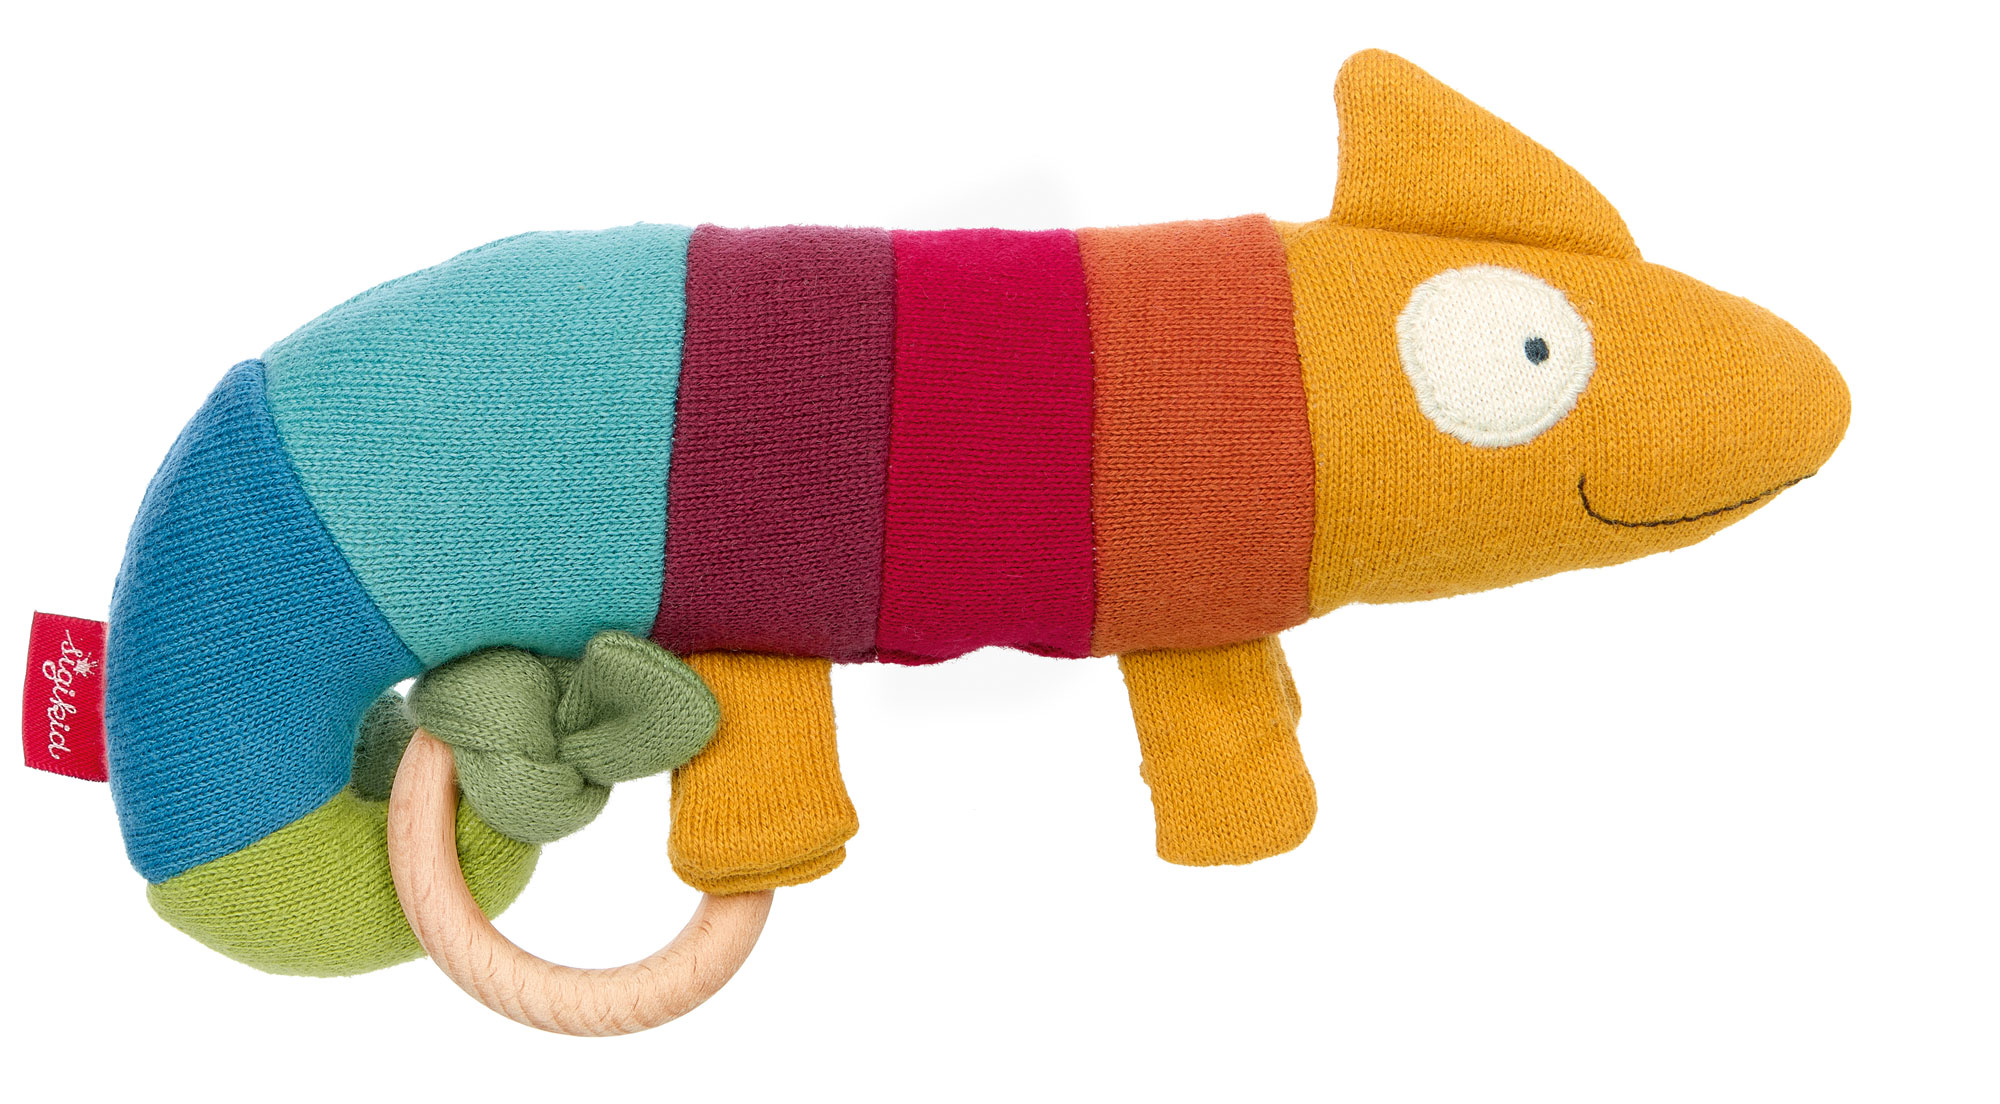 Knitted grasp toy chameleon with rattle and wooden teether